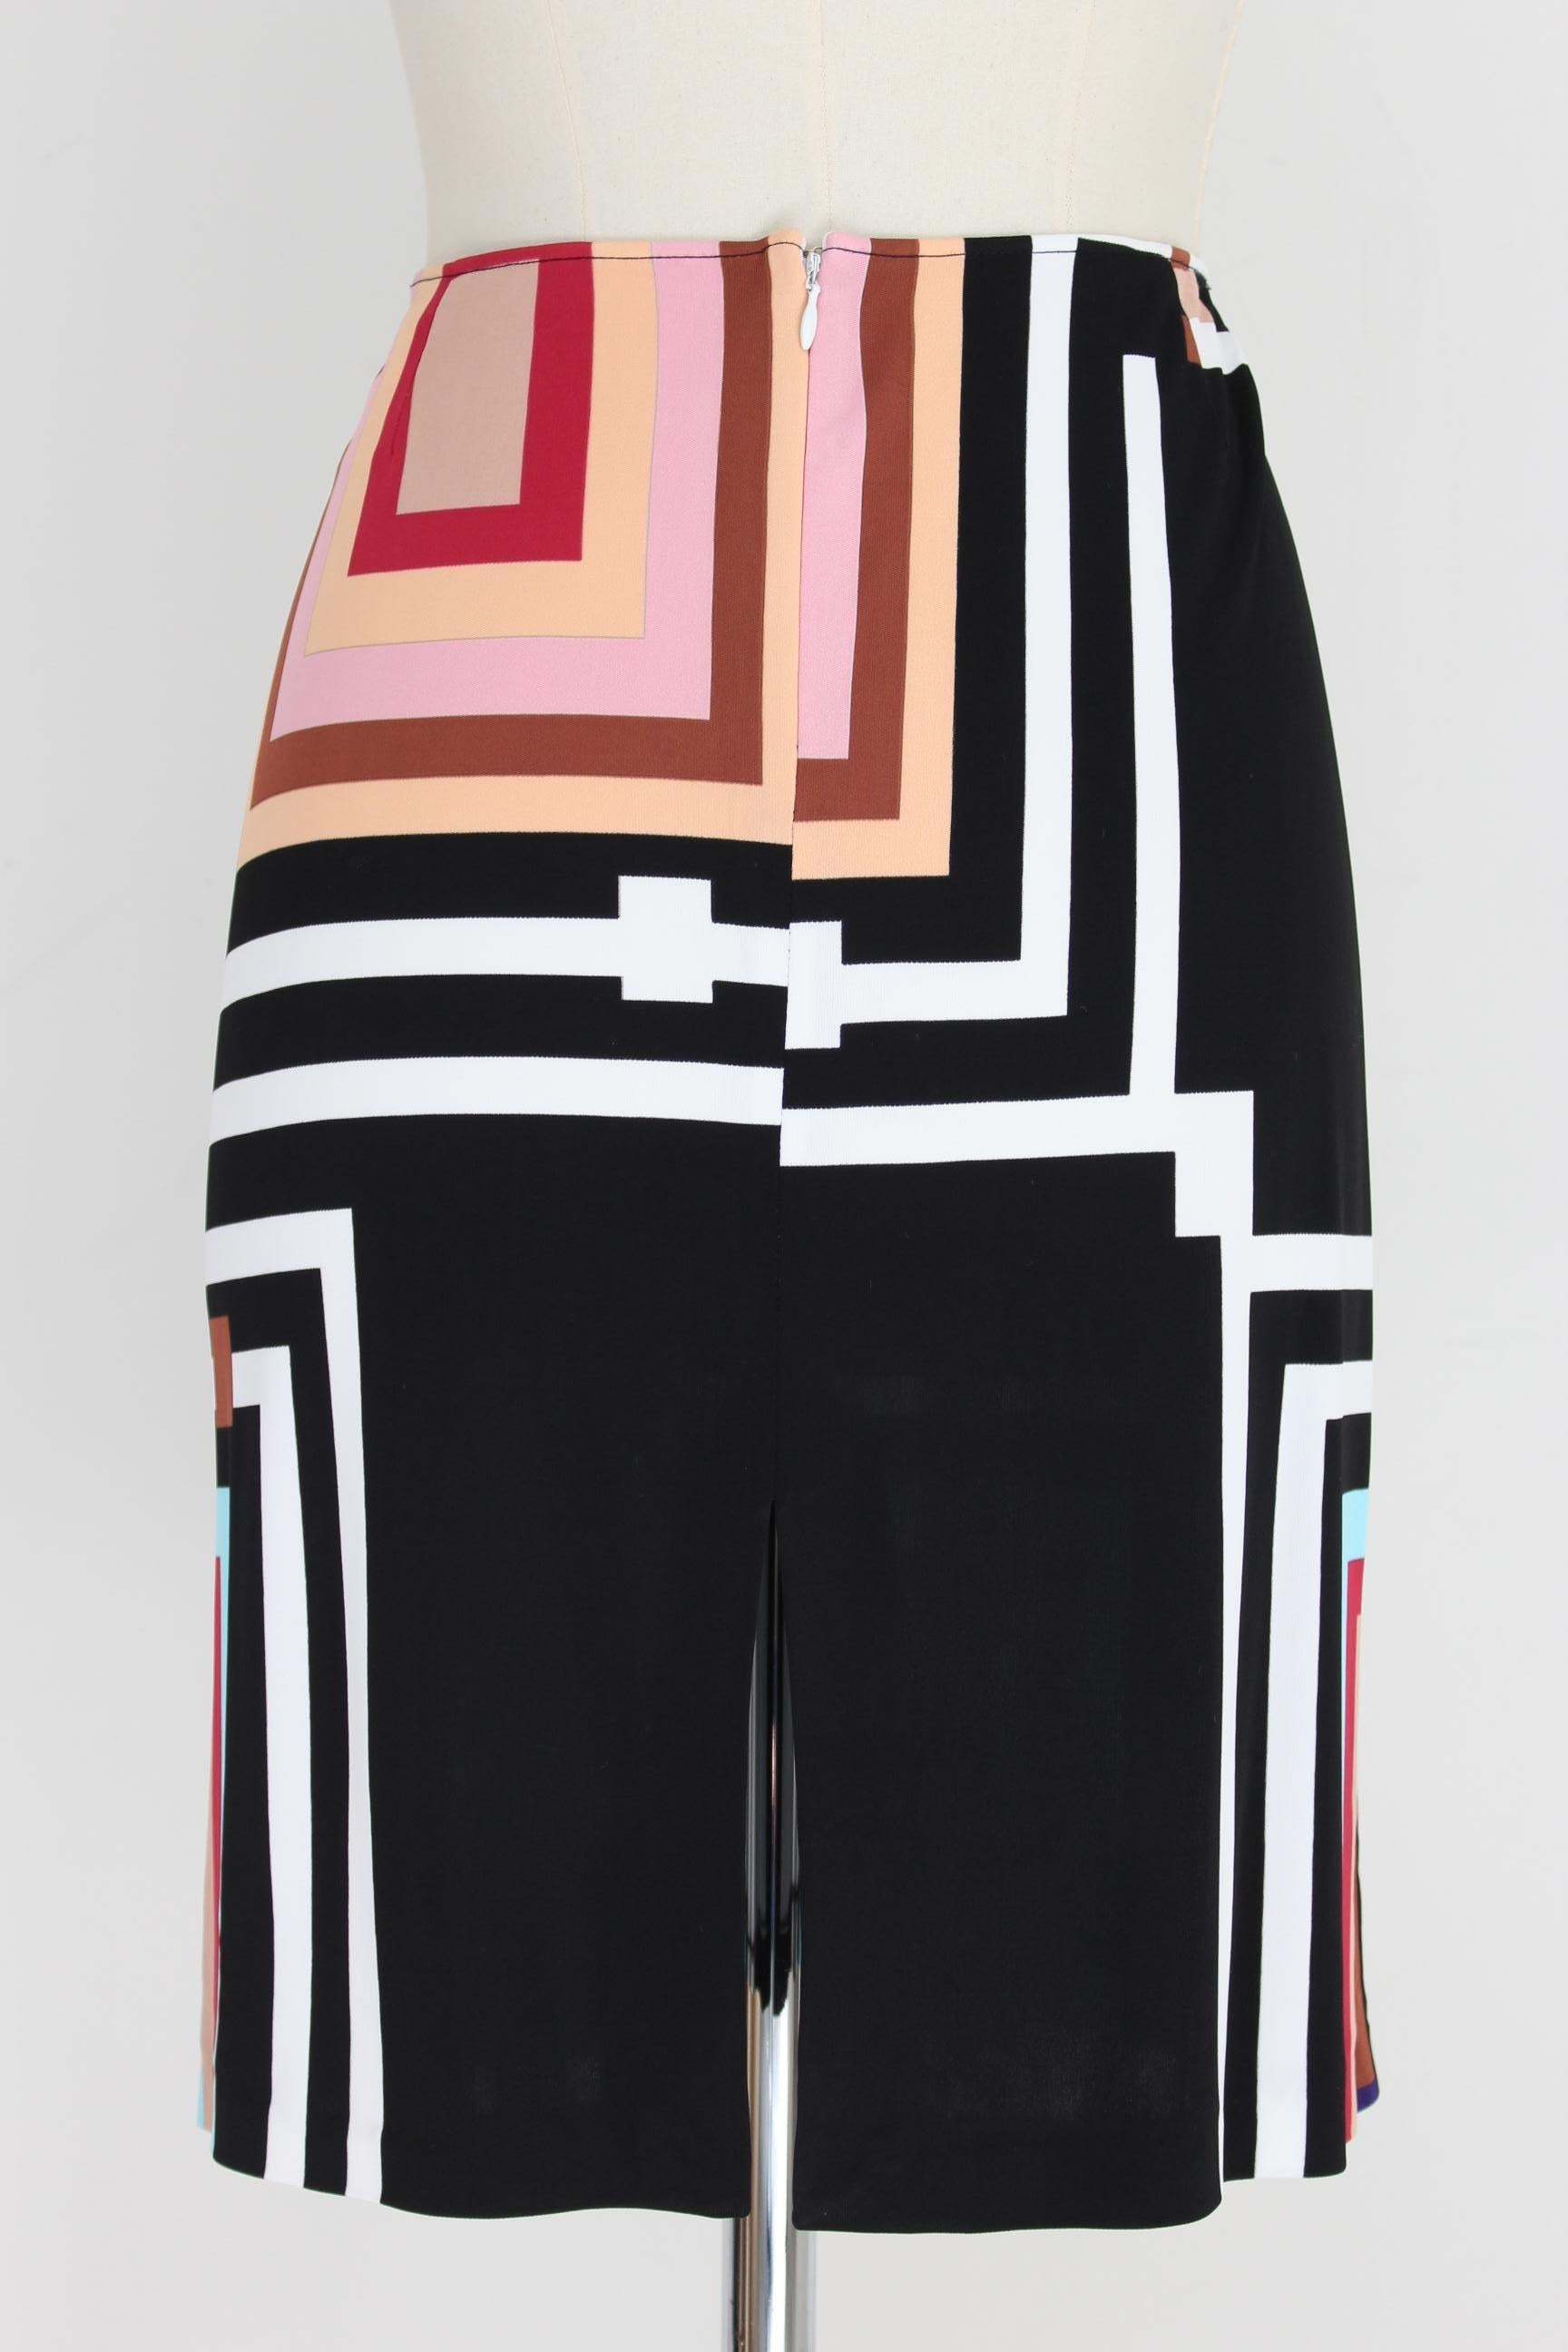 Gianfranco Ferre Jeans vintage 90s skirt. Model short on the knee, 100% viscose. Color white , black and pink with geometric designs. Made in Italy. Excellent vintage conditions.

Size: 46 It 12 Us 14 Uk

Waist: 38 cm
Length: 53 cm